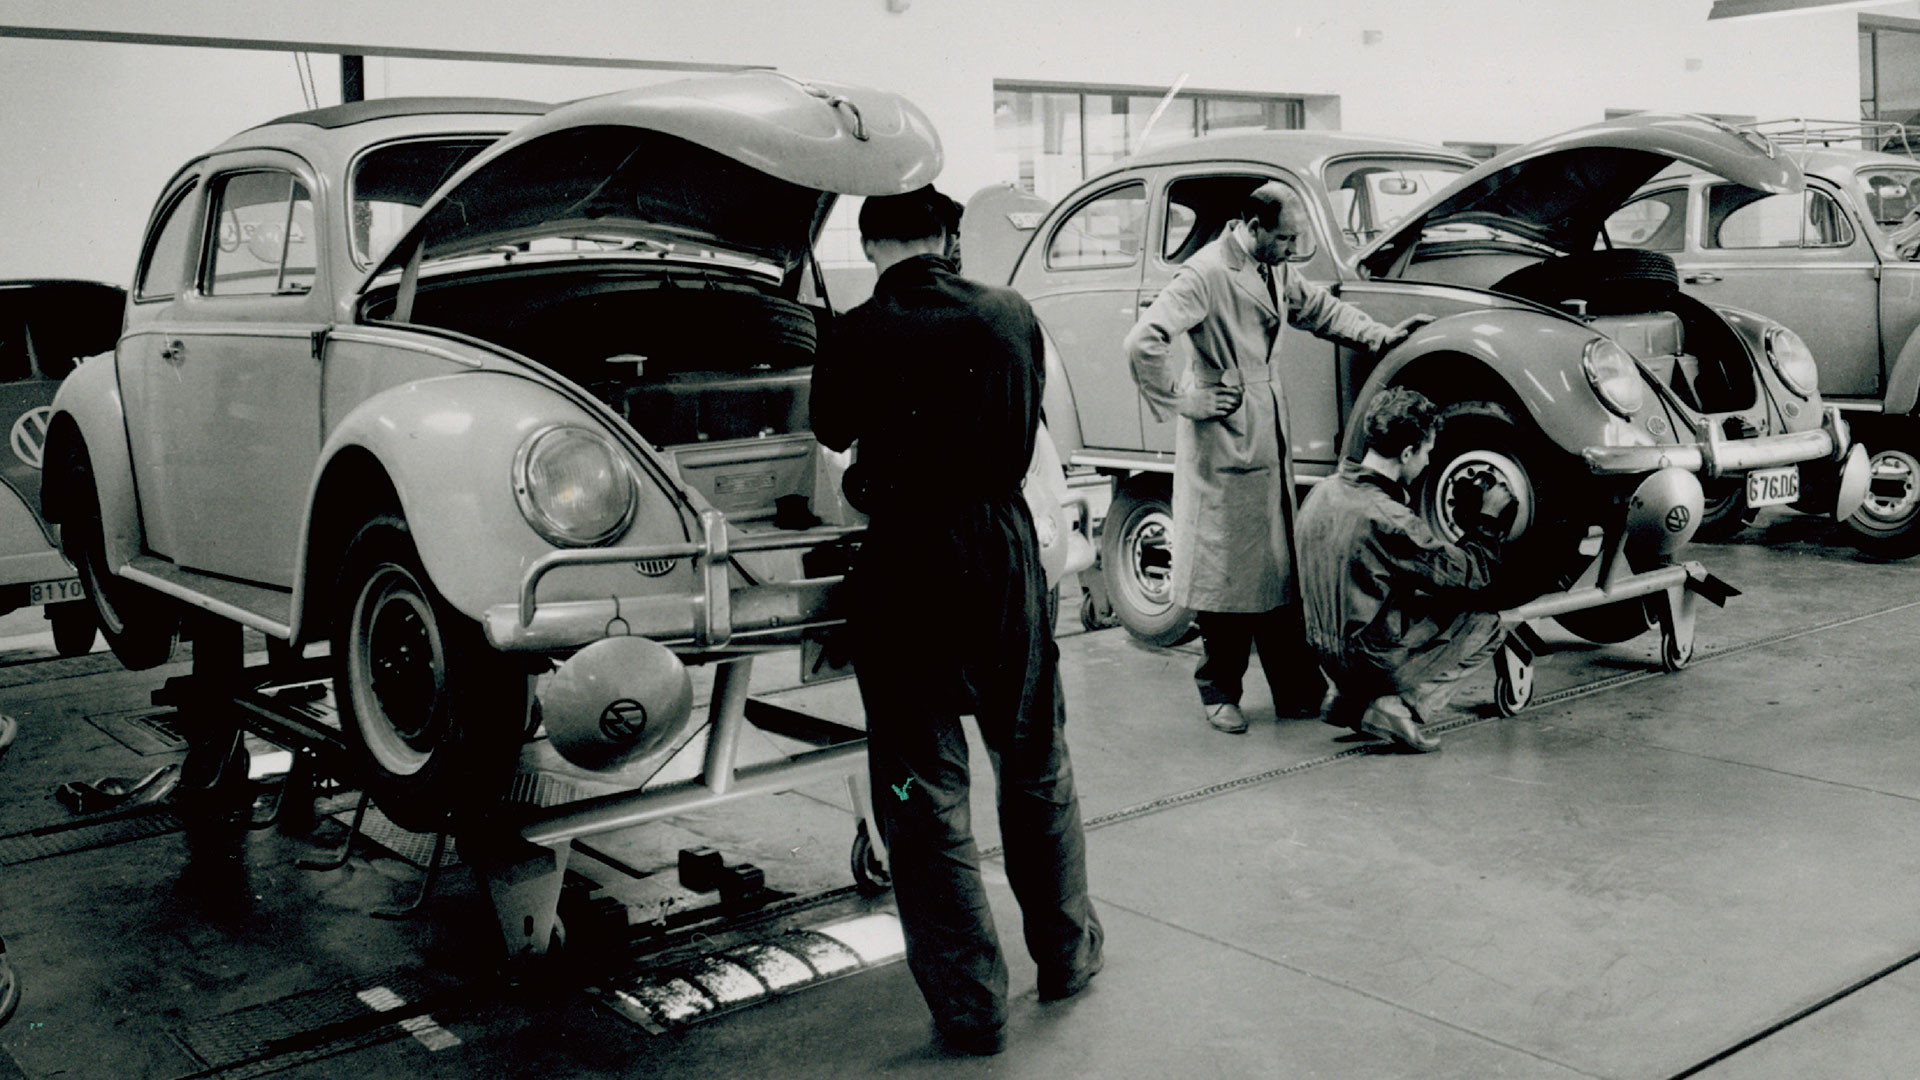 In this black and white photo, you can see 3 workers working on Beetles